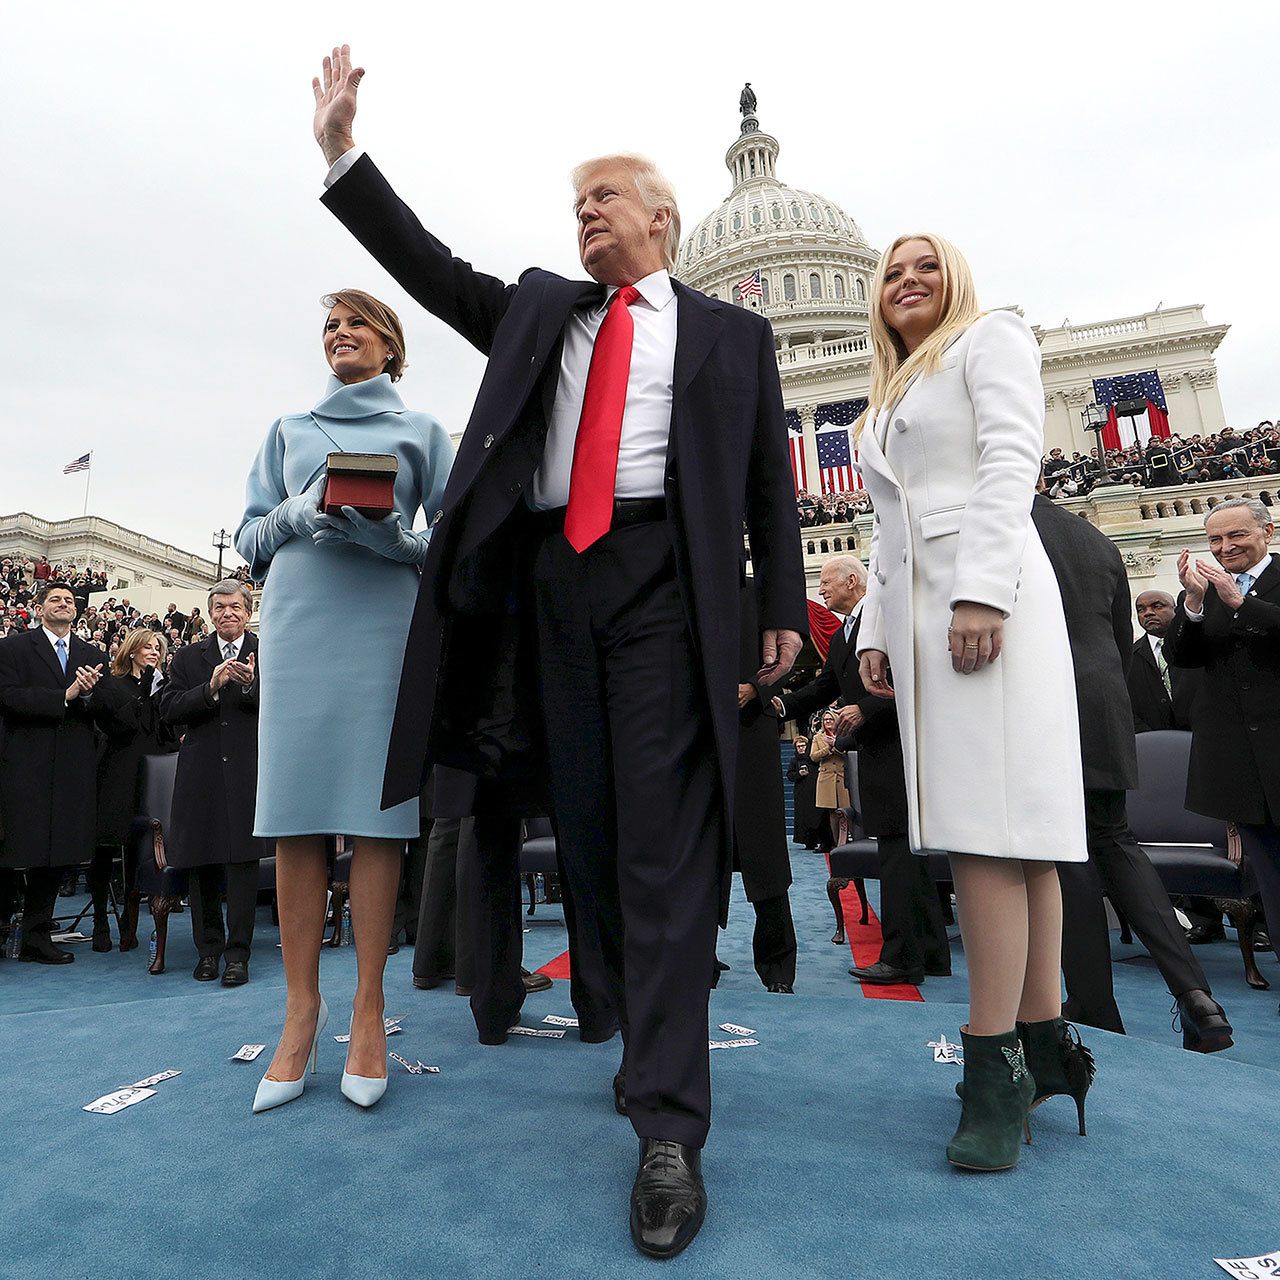 President Donald Trump waves after taking the oath of office at the Capitol in Washington, D.C., on Friday. At left is his wife, Melania. At right is daughter Tiffany. (Jim Bourg/Pool Photo via AP)